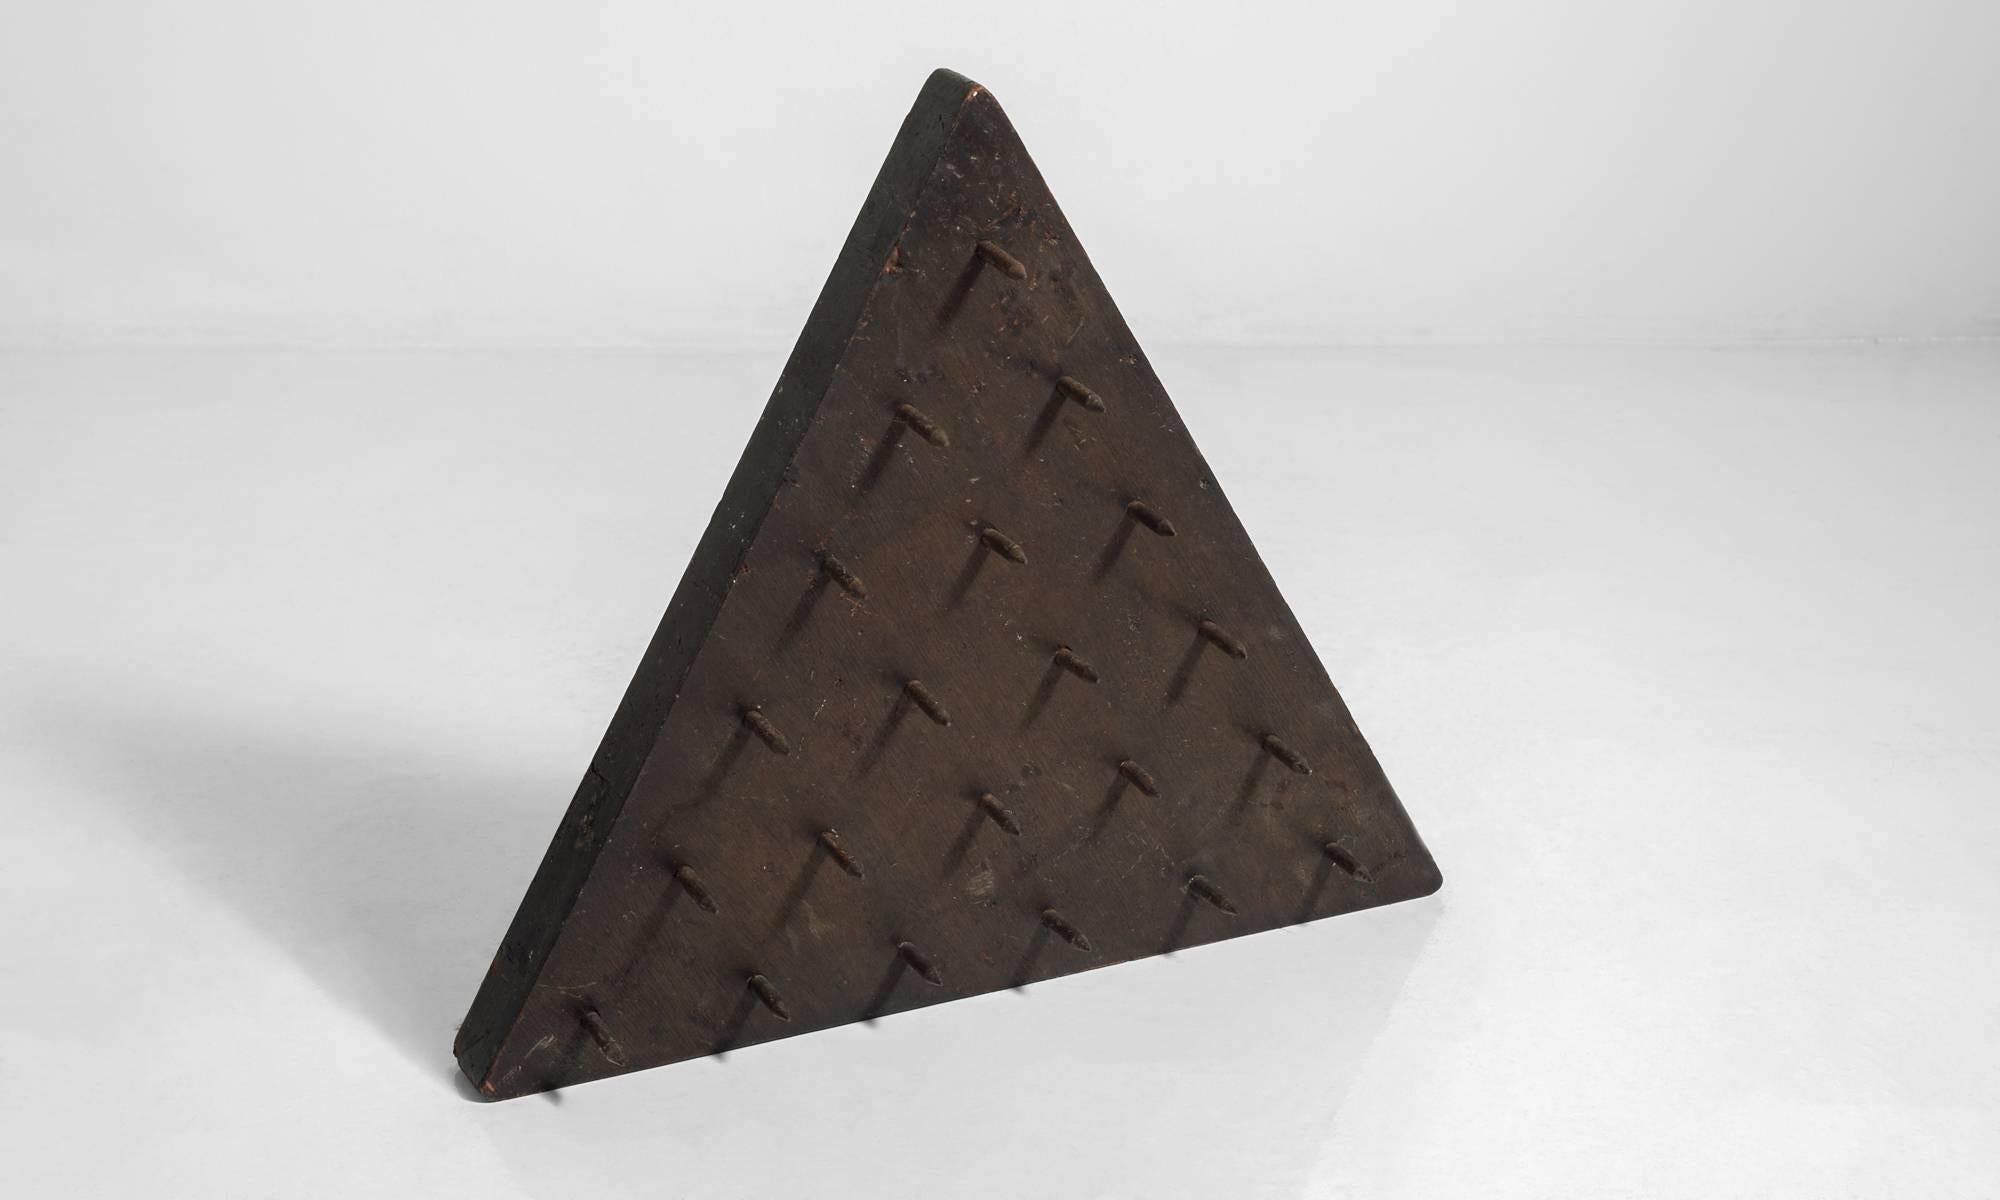 Originally from the Old Fellows Lodge. Initiates were told they would be required to sit on the spiked panel, and when blind folded, a rubber version was substituted.